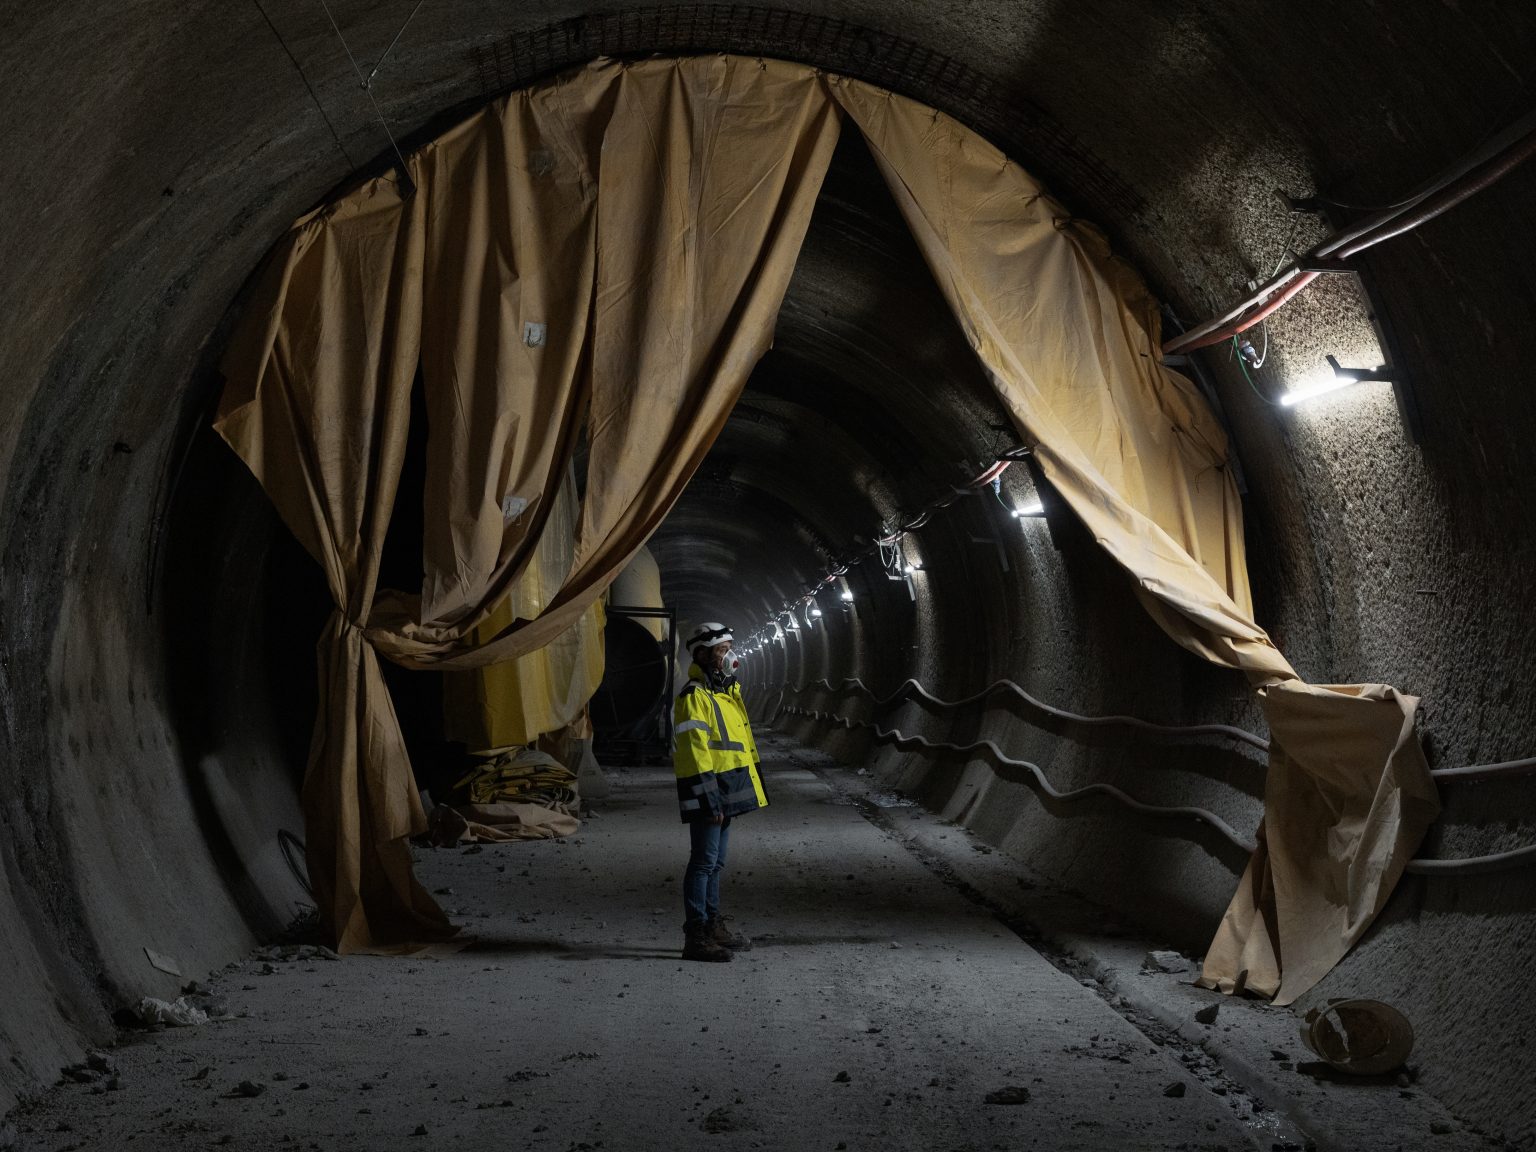 The interior of the geognostic tunnel of the TAV Chiemonte site. Several environmental studies have shown that inside the mountain there is a large amount of asbestos, a substance which, if not treated appropriately, could cause major health problems for the site workers and the inhabitants of the Susa Valley.
Chiomonte (Turin), Italy, March 2022. © Matteo Trevisan

><

Linterno del tunnel geognostico del cantiere TAV di Chiomonte. Diversi studi ambientali hanno dimostrato che al interno della montagna è presente un grande quantitativo di amianto, una sostanza, che se non trattata in maniera appropriata, potrebbe causare grossi problemi alla salute degli operai del cantiere e li abitanti della Valle di Susa. 
Chiomonte (Torino), Italia, marzo 2022.